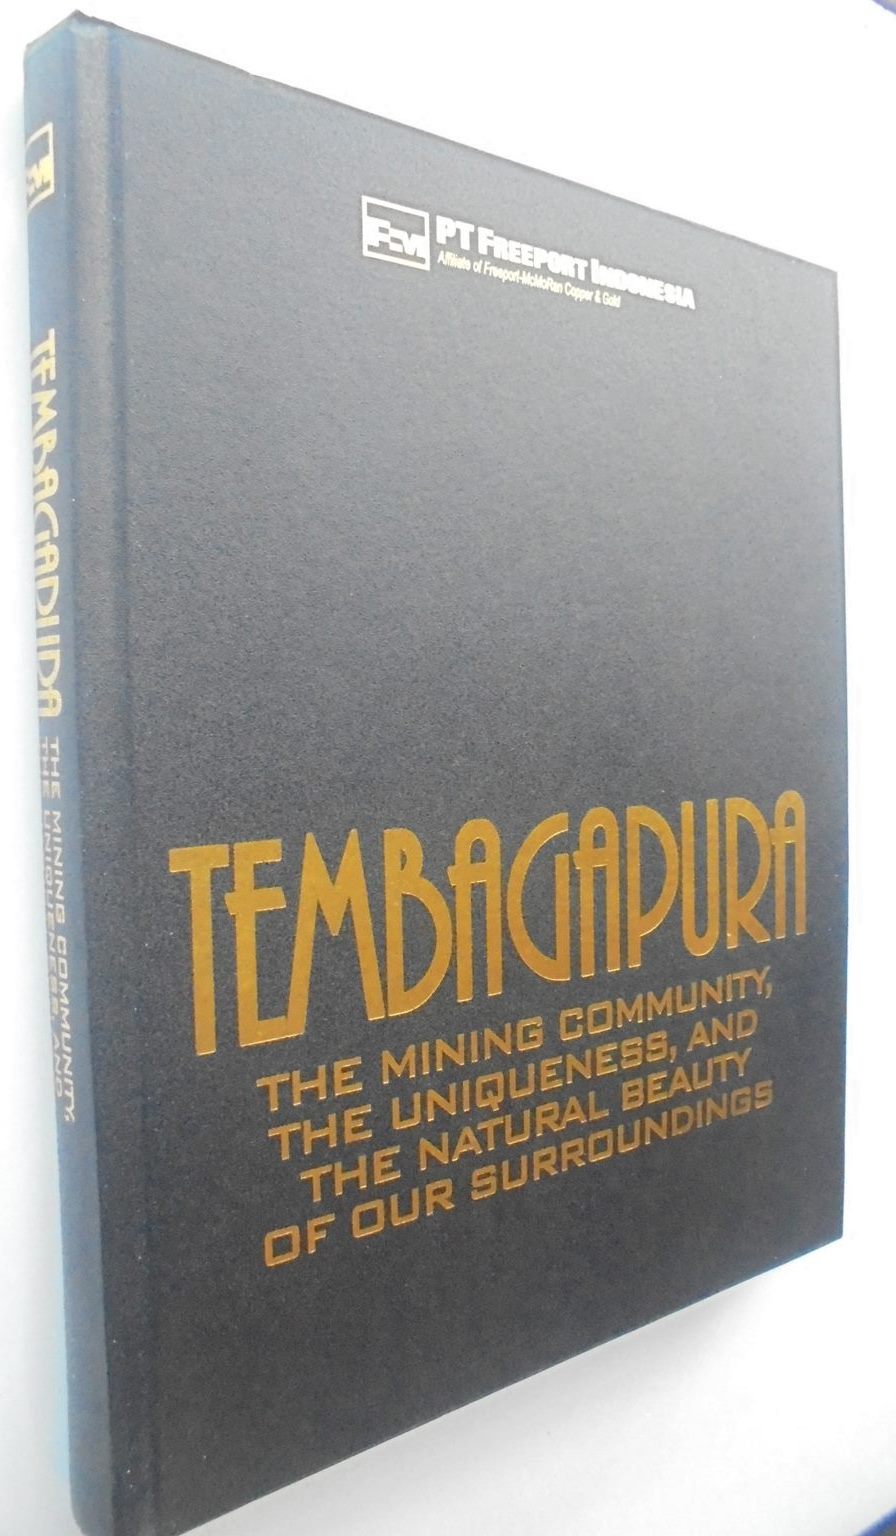 "Tembagapura : The mining community , the uniqueness and the natural beauty of our surroundings". PT Freeport Indonesia, 2011.